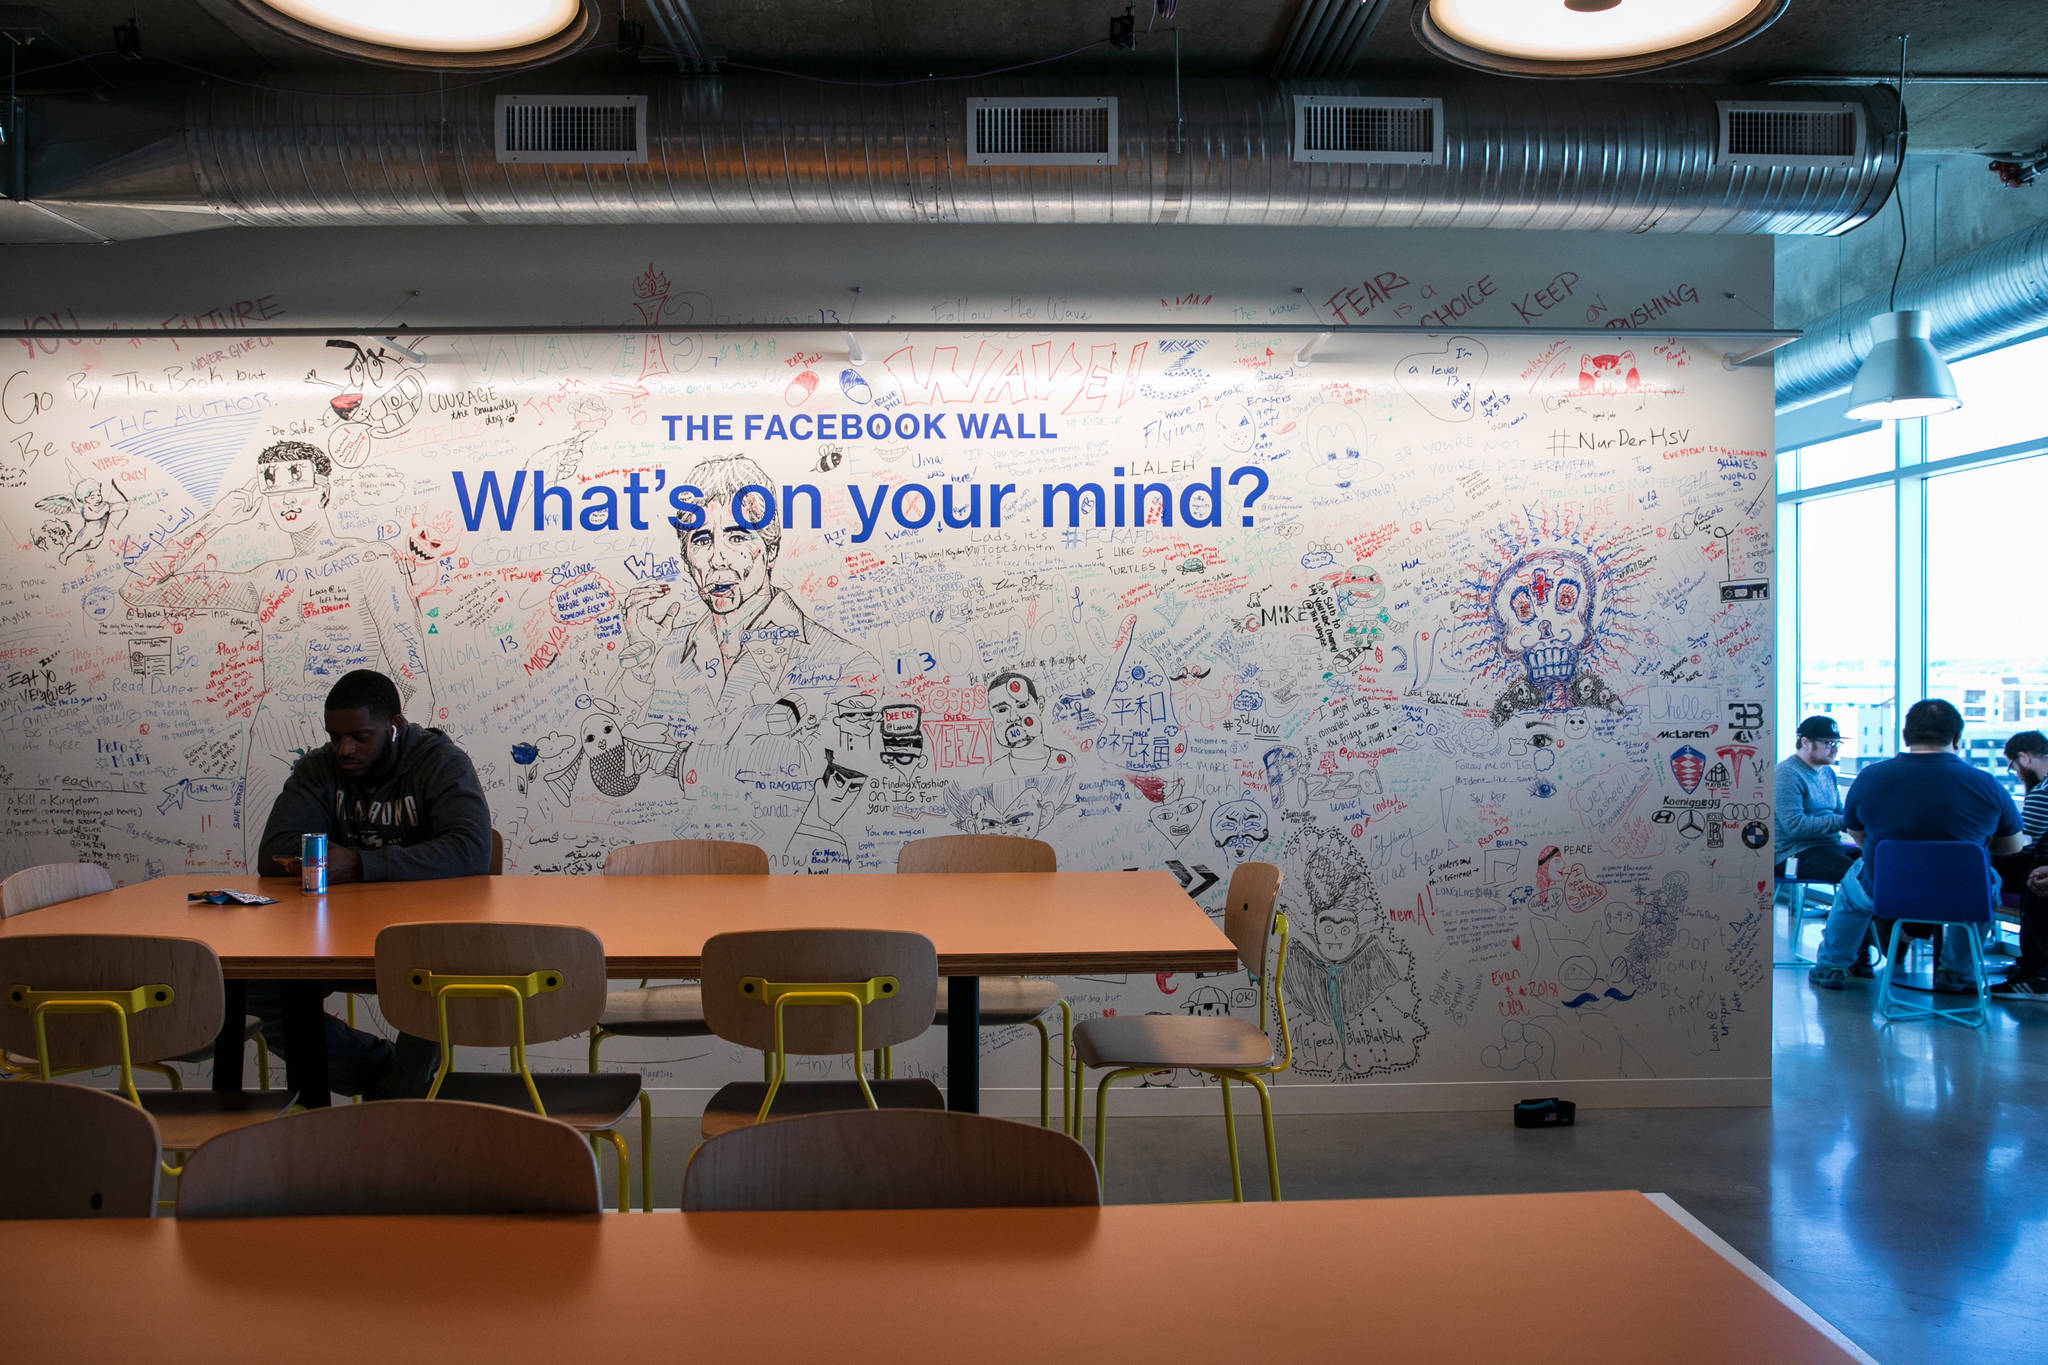 Content moderators work at a Facebook office in Austin, Texas on March 5, 2019. (Photo for The Washington Post by Ilana Panich-Linsman)